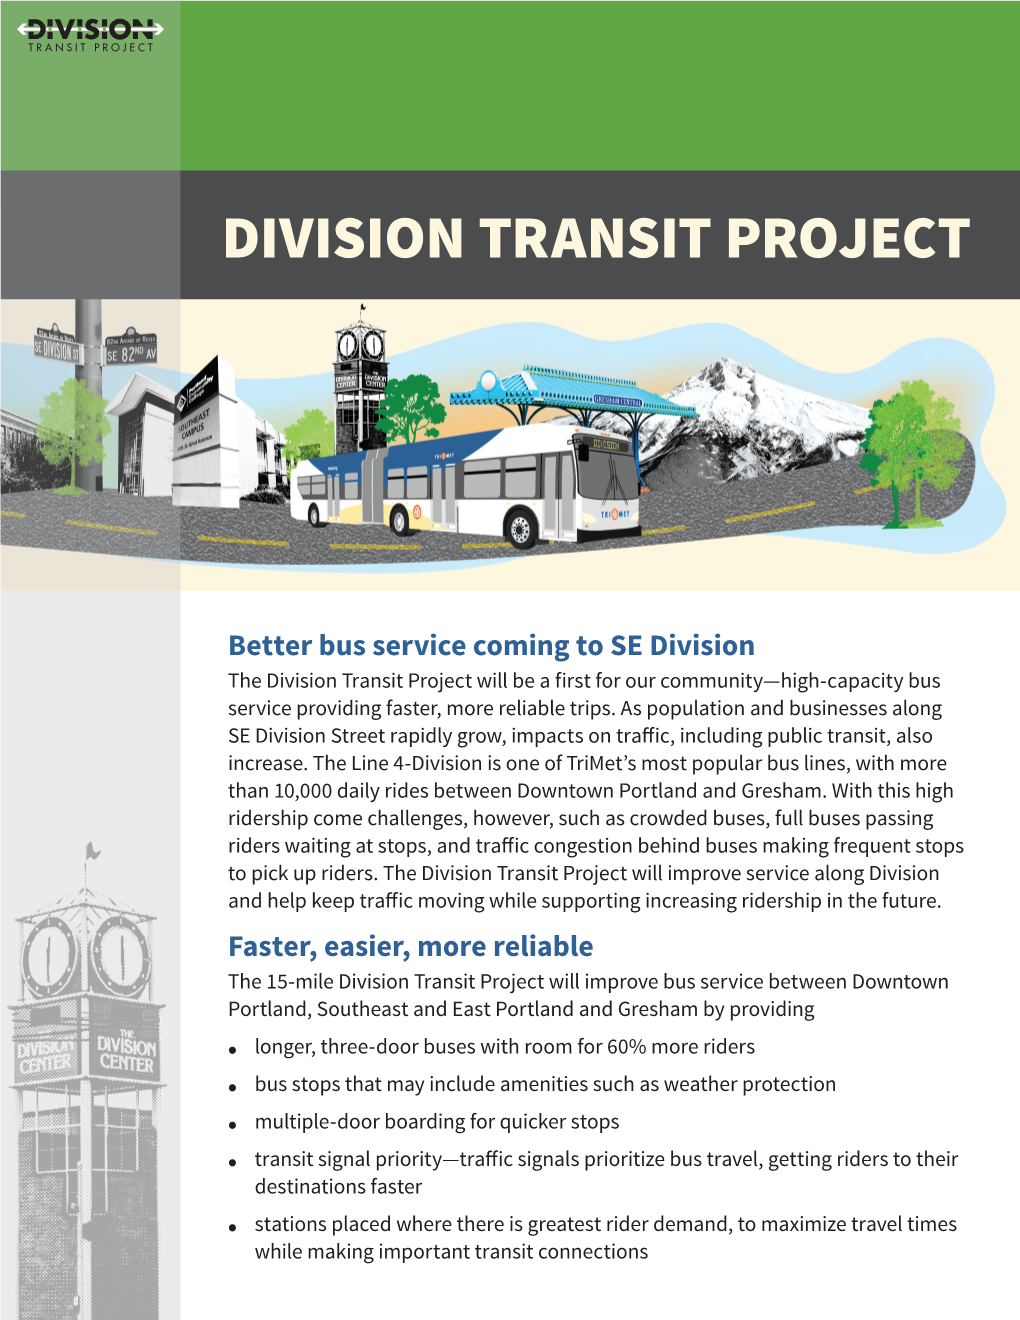 Division Transit Project